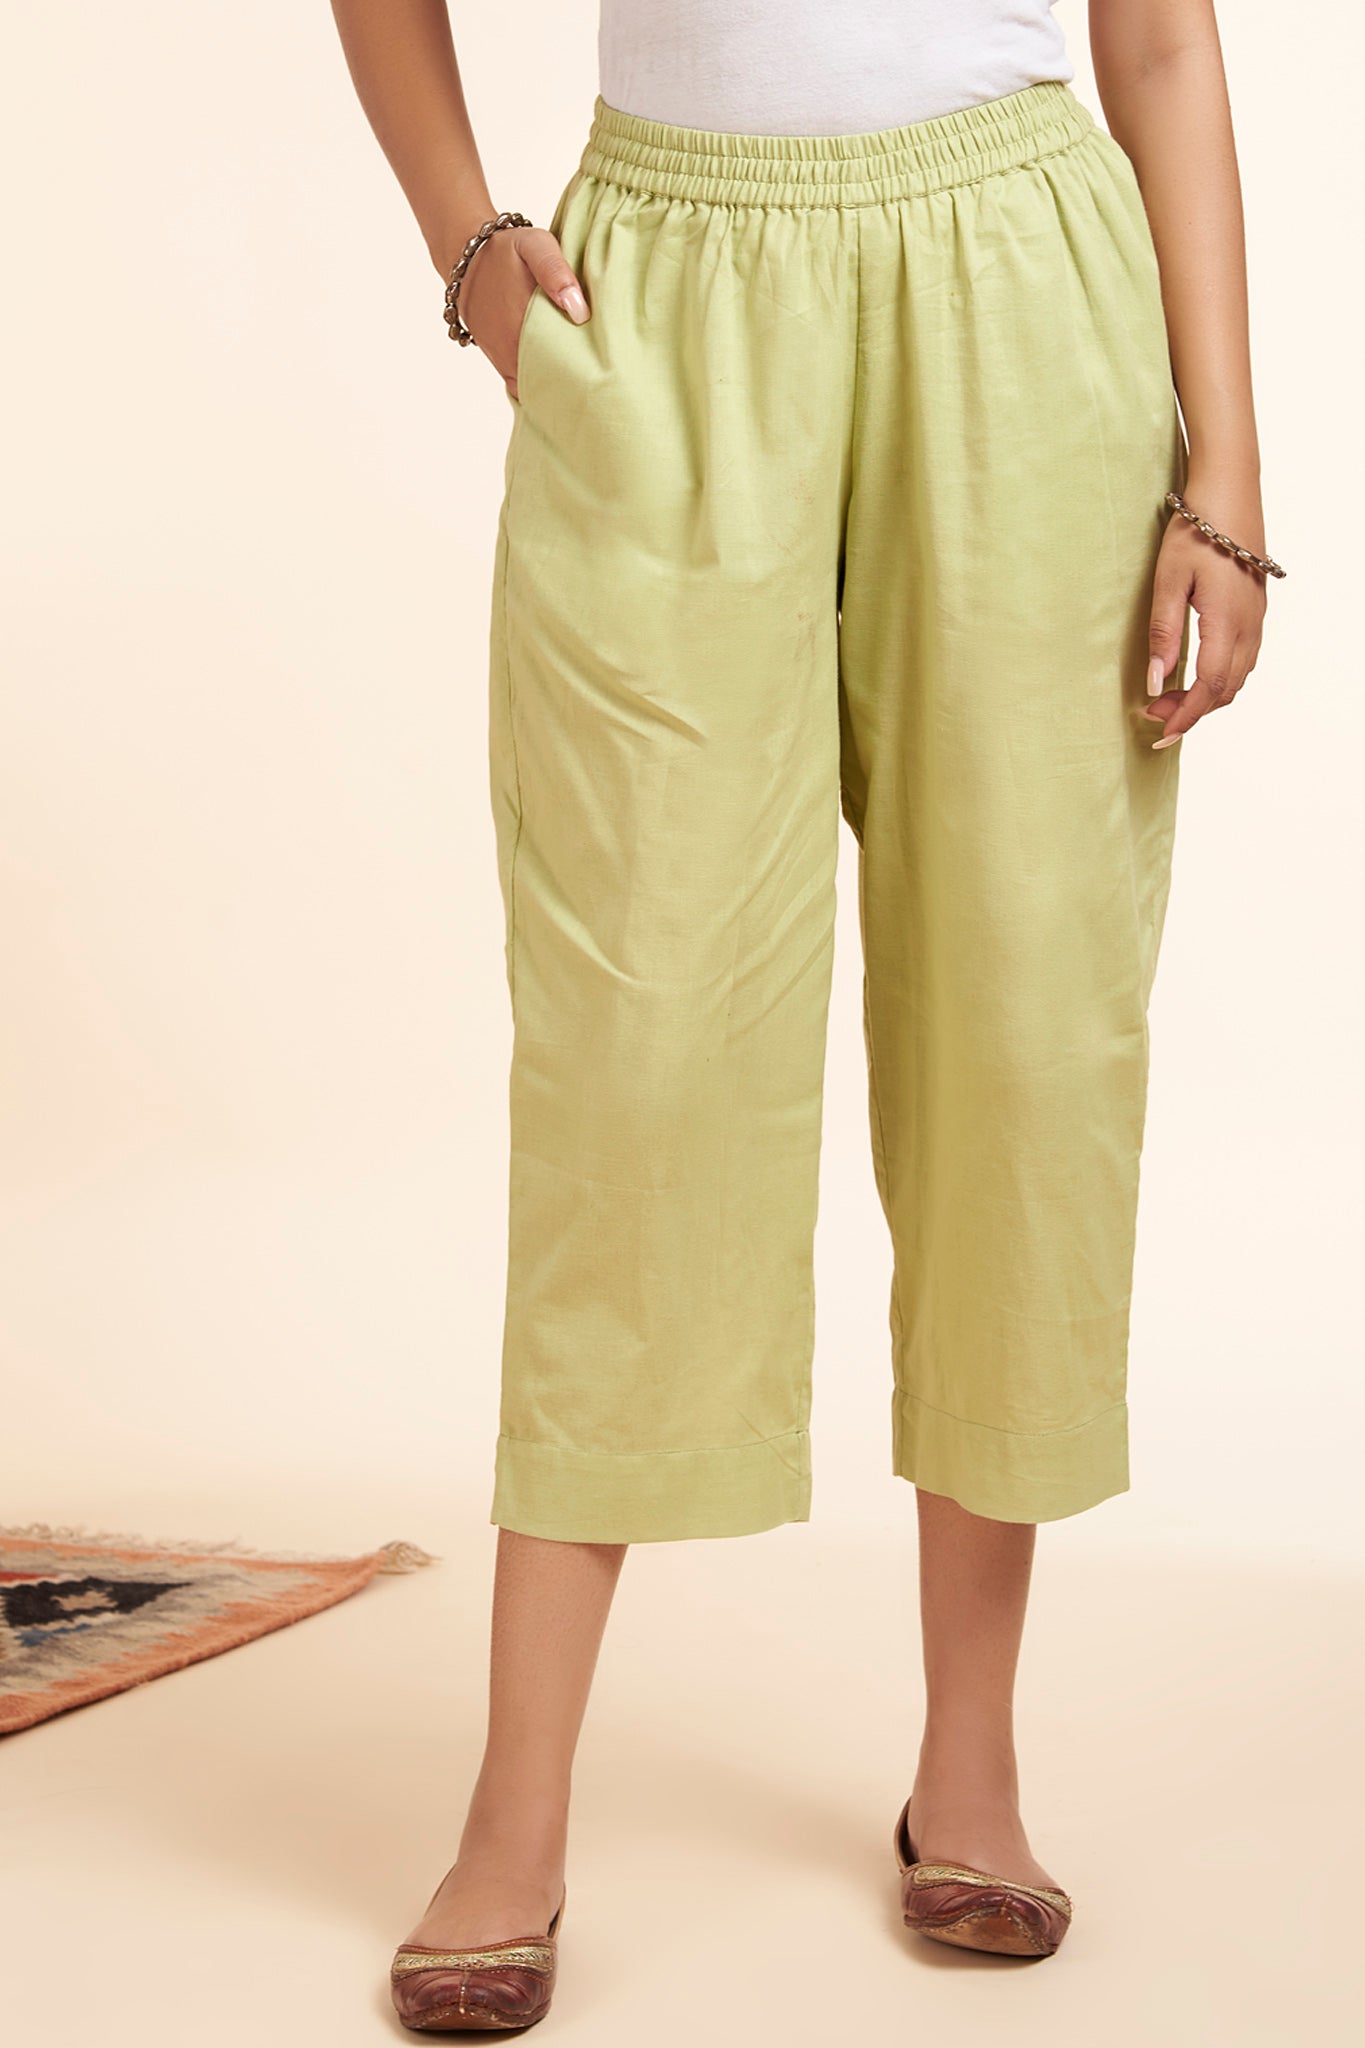 comfort fit ankle length narrow cotton pants - light green - maati crafts